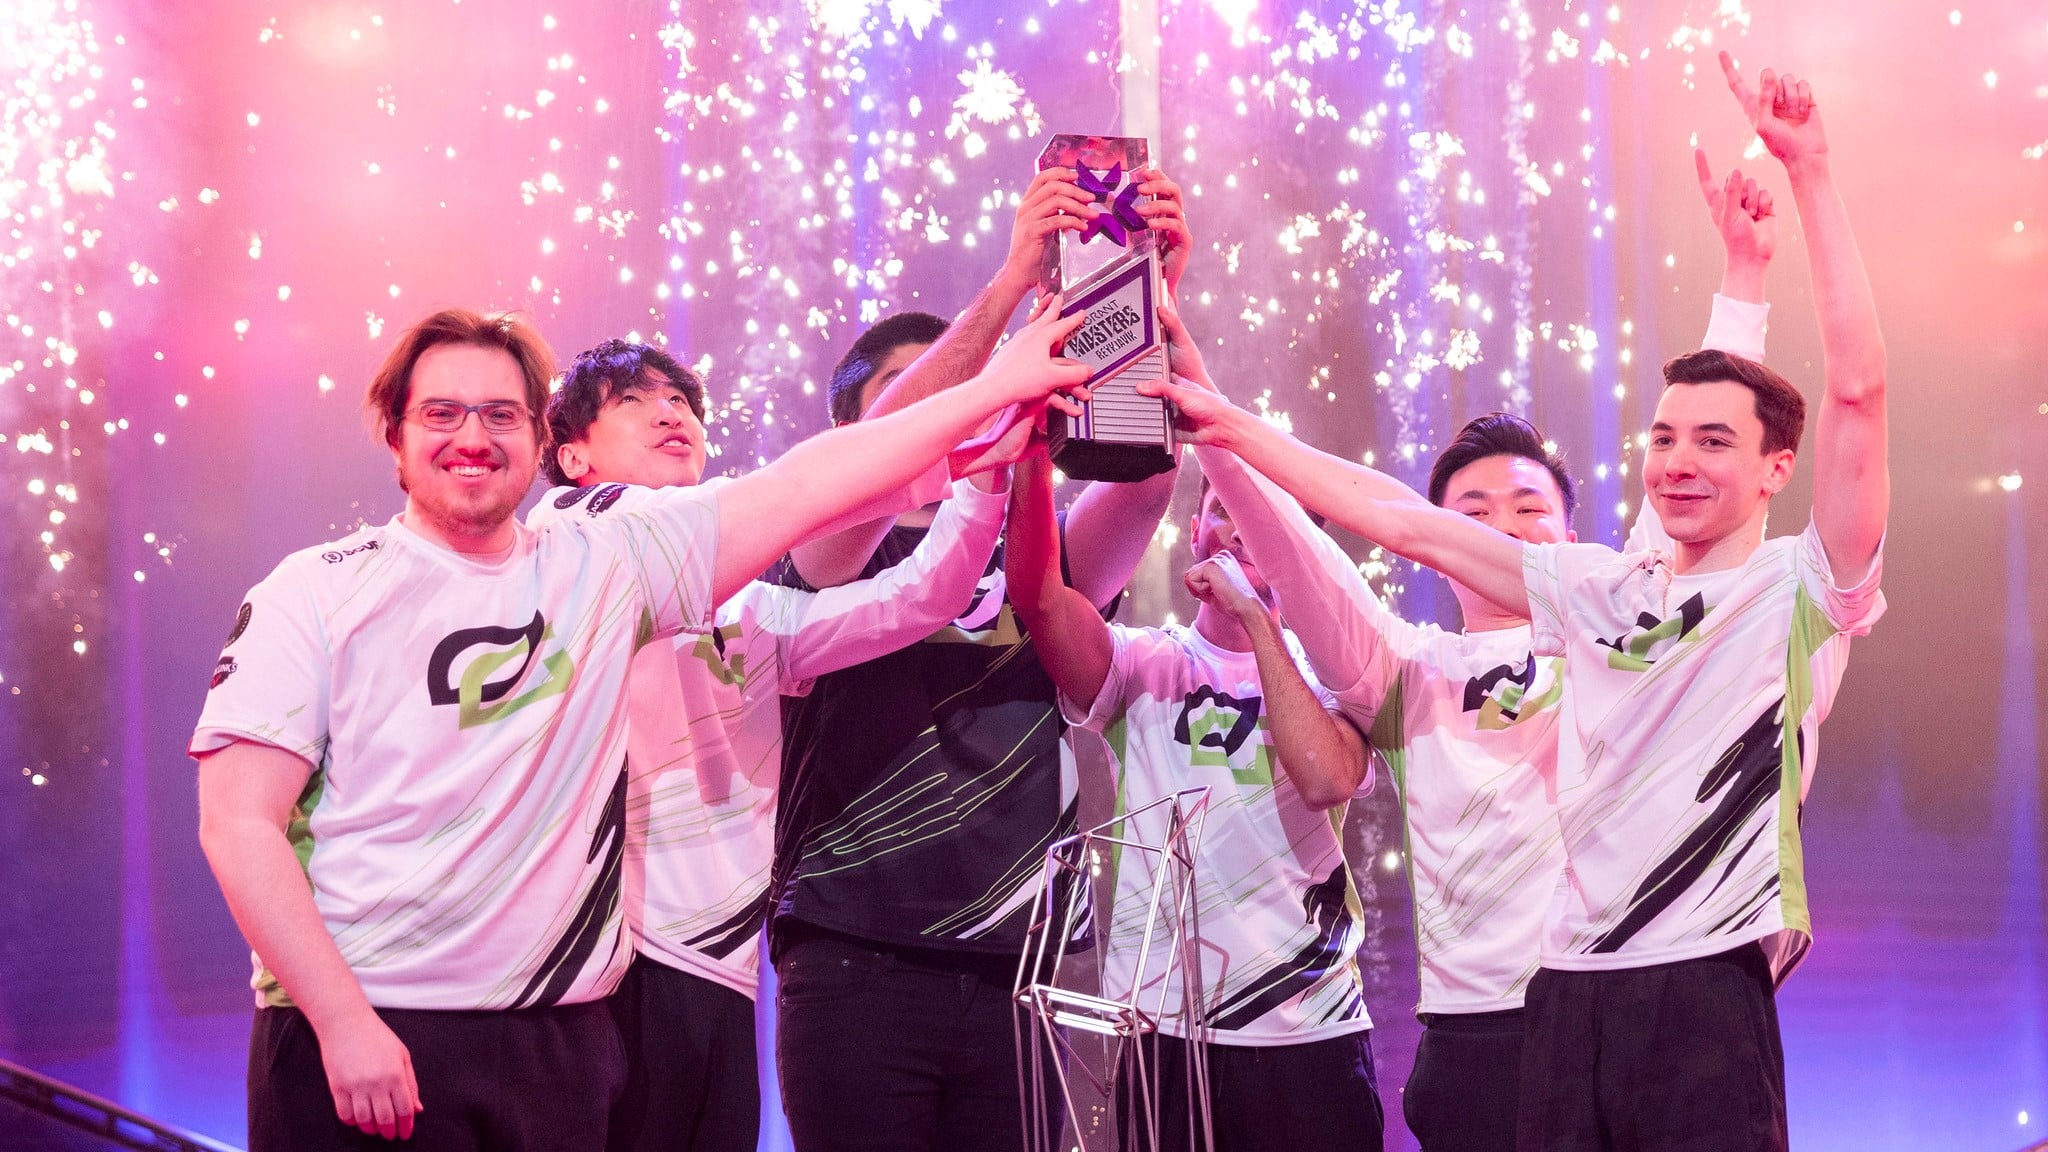 OpTic holds the 2022 Iceland Masters trophy as a team